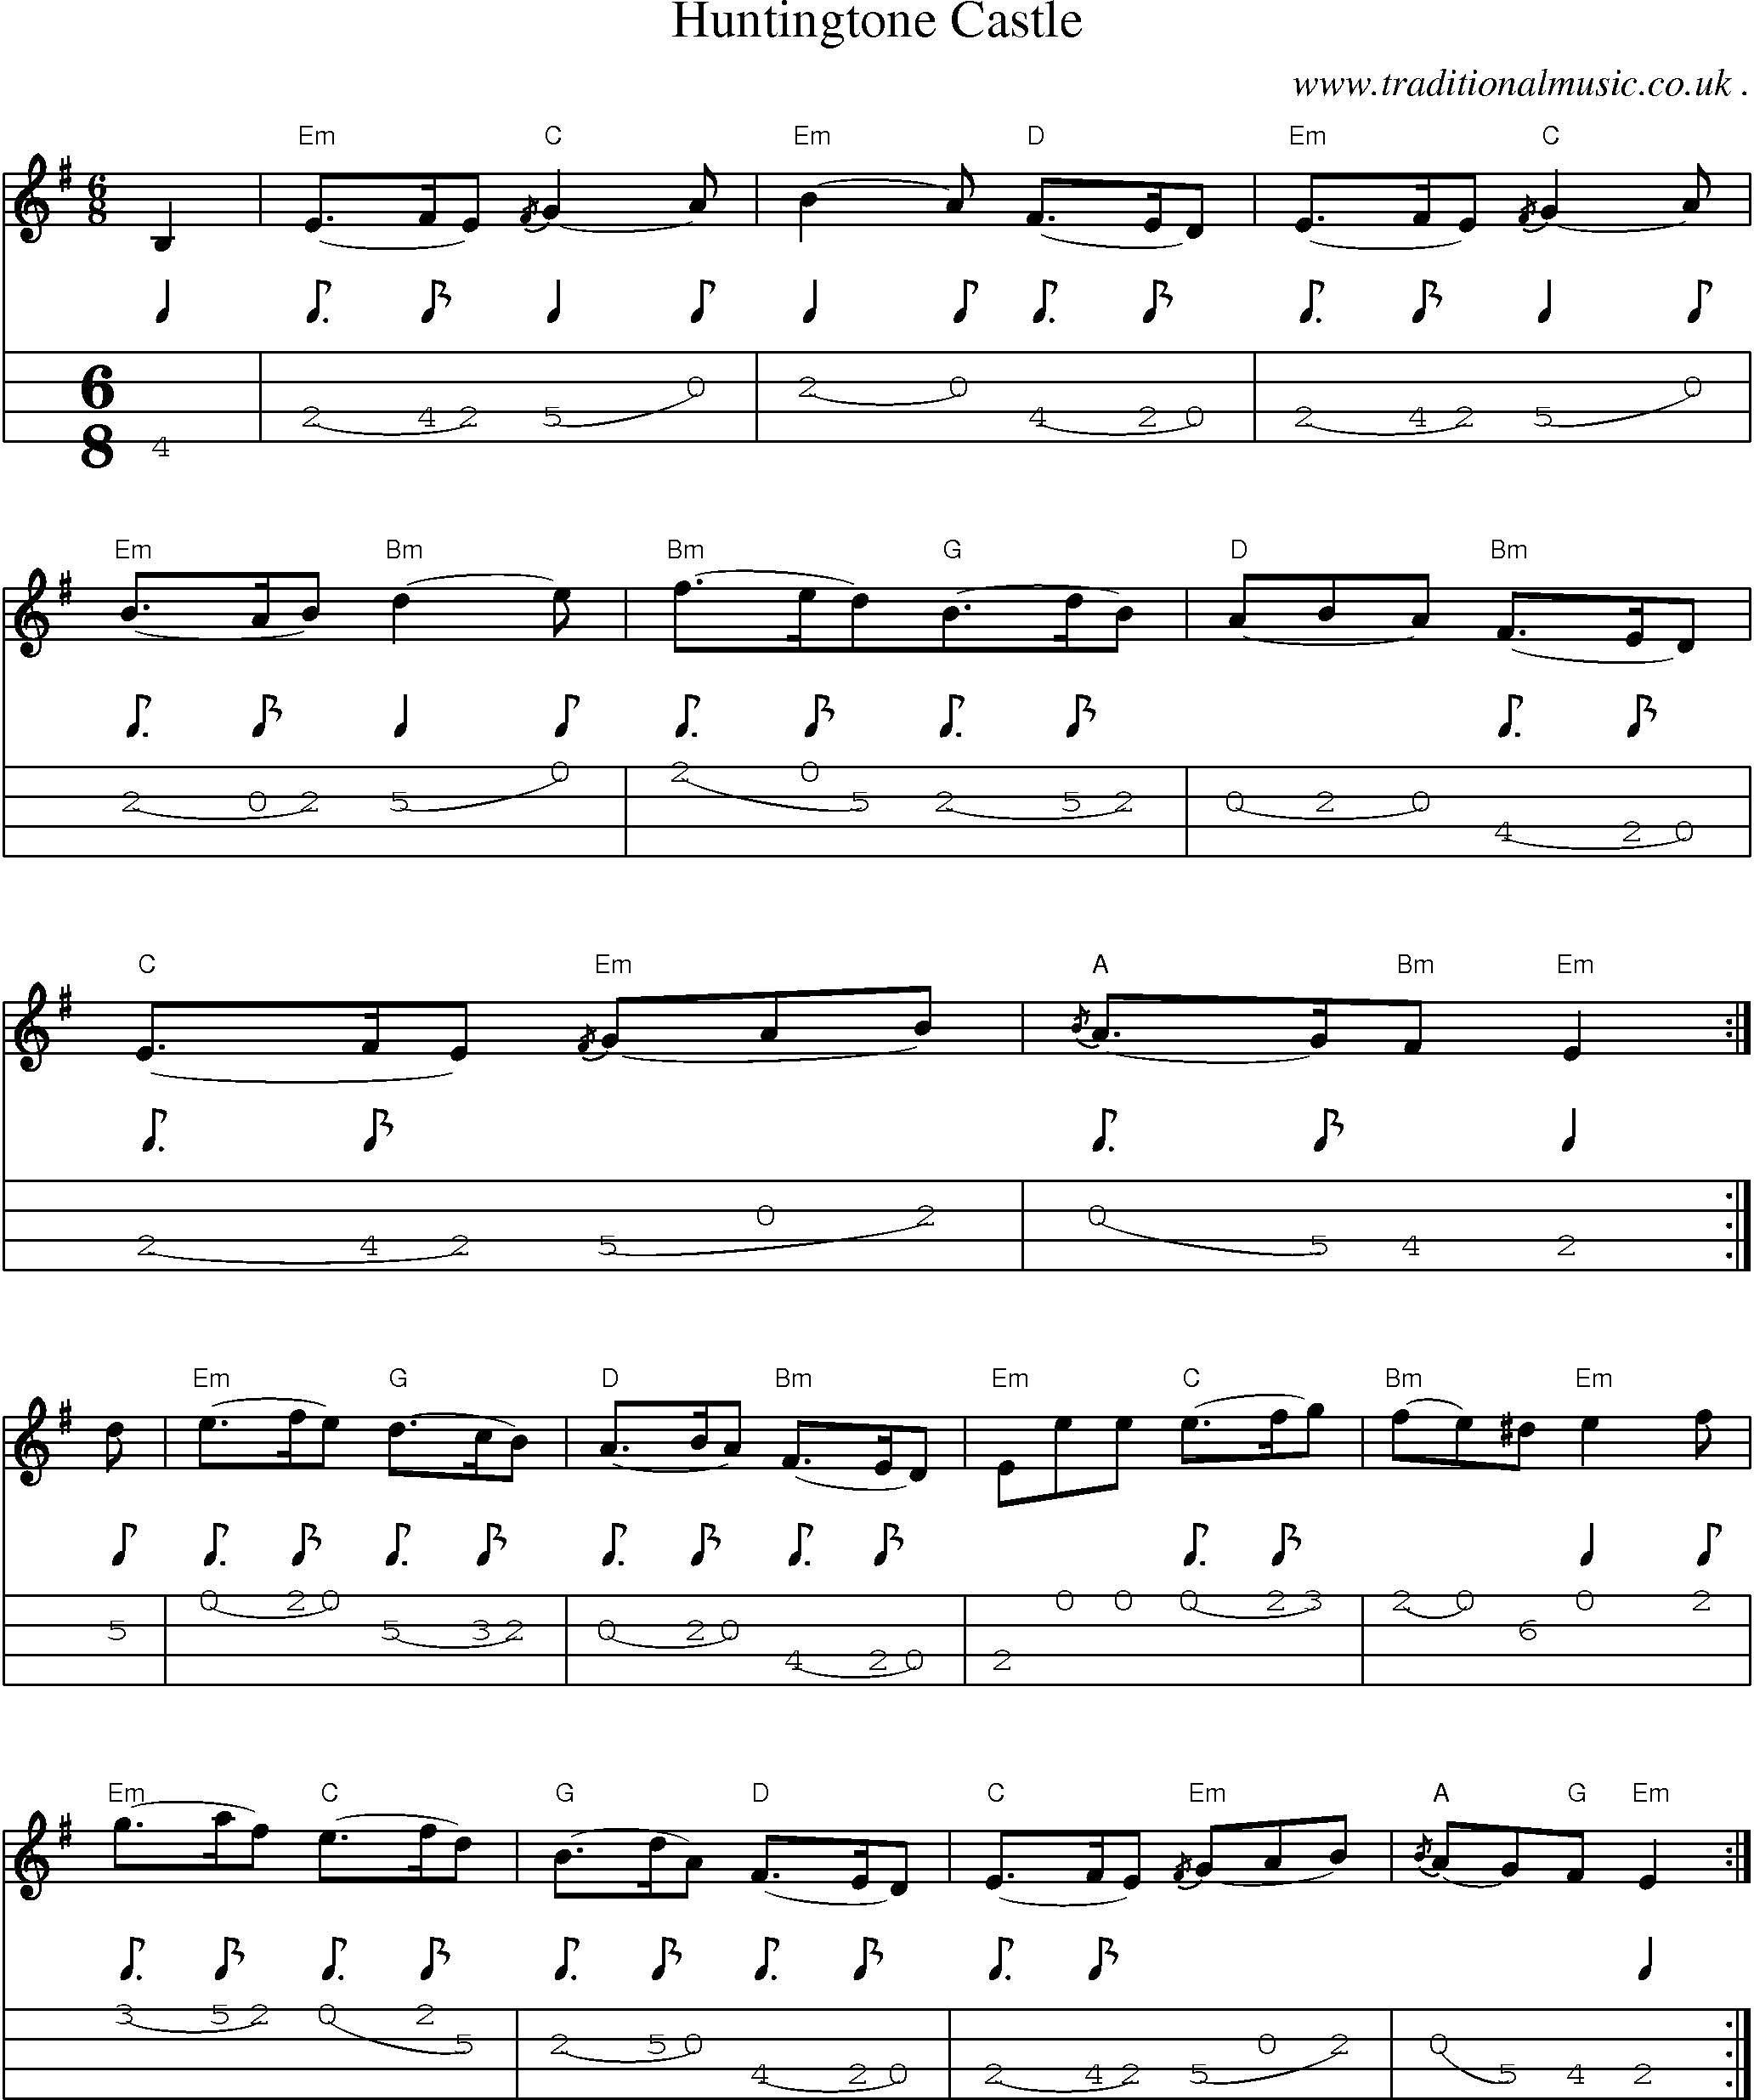 Music Score and Guitar Tabs for Huntingtone Castle